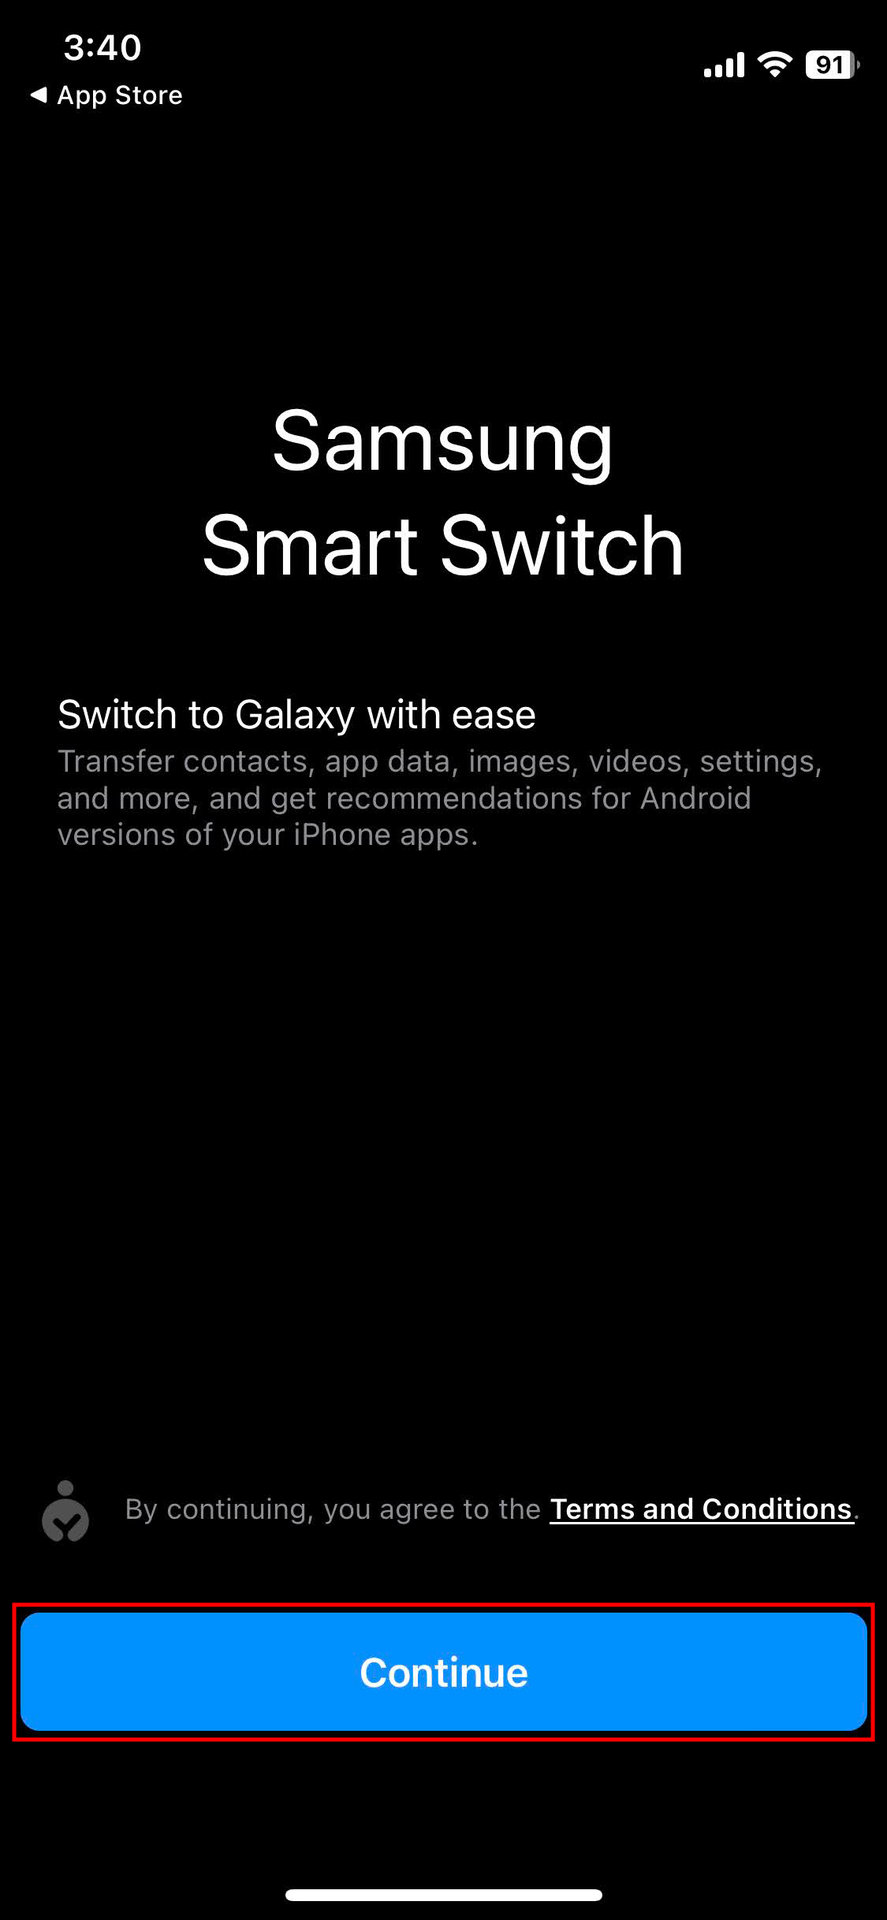 How to use Smart Switch to transfer photos from iPhone to Samsung (6)